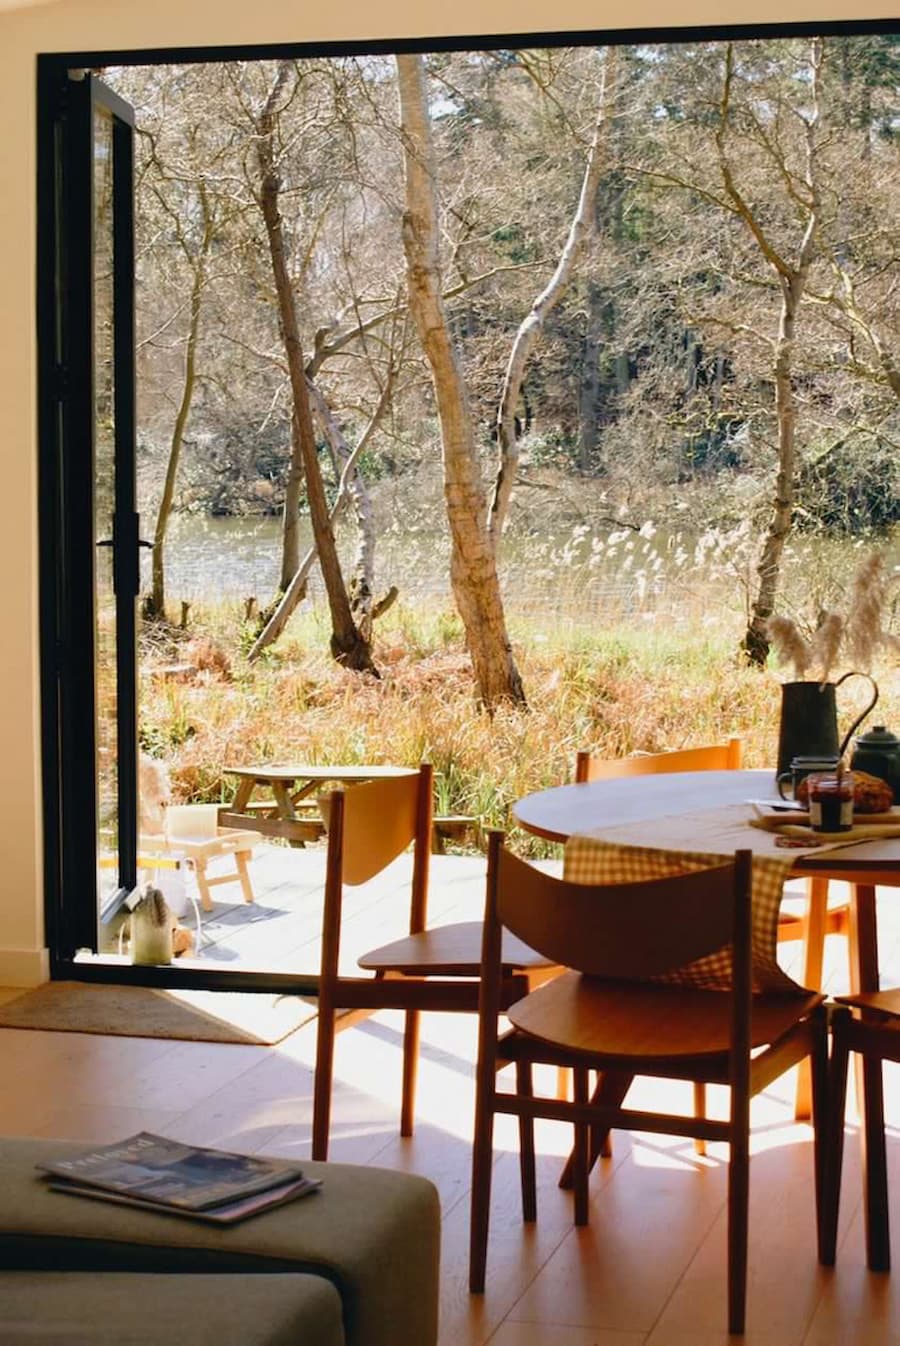 Koto cabin dining room with bi-fold doors across the whole width of the wall which are open overlooking the woodland and lake